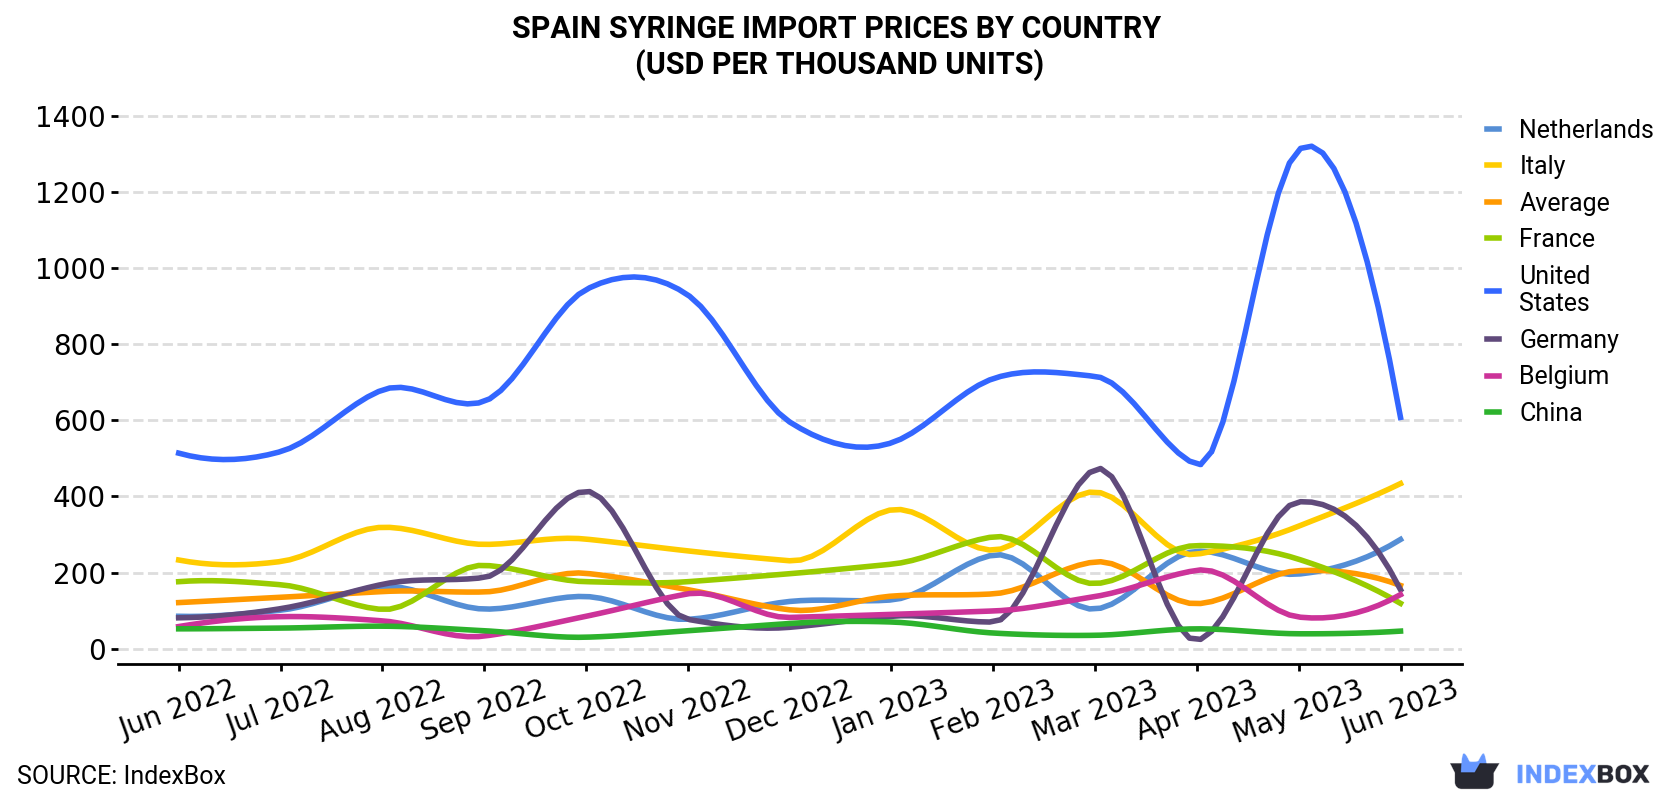 Spain Syringe Import Prices By Country (USD Per Thousand Units)